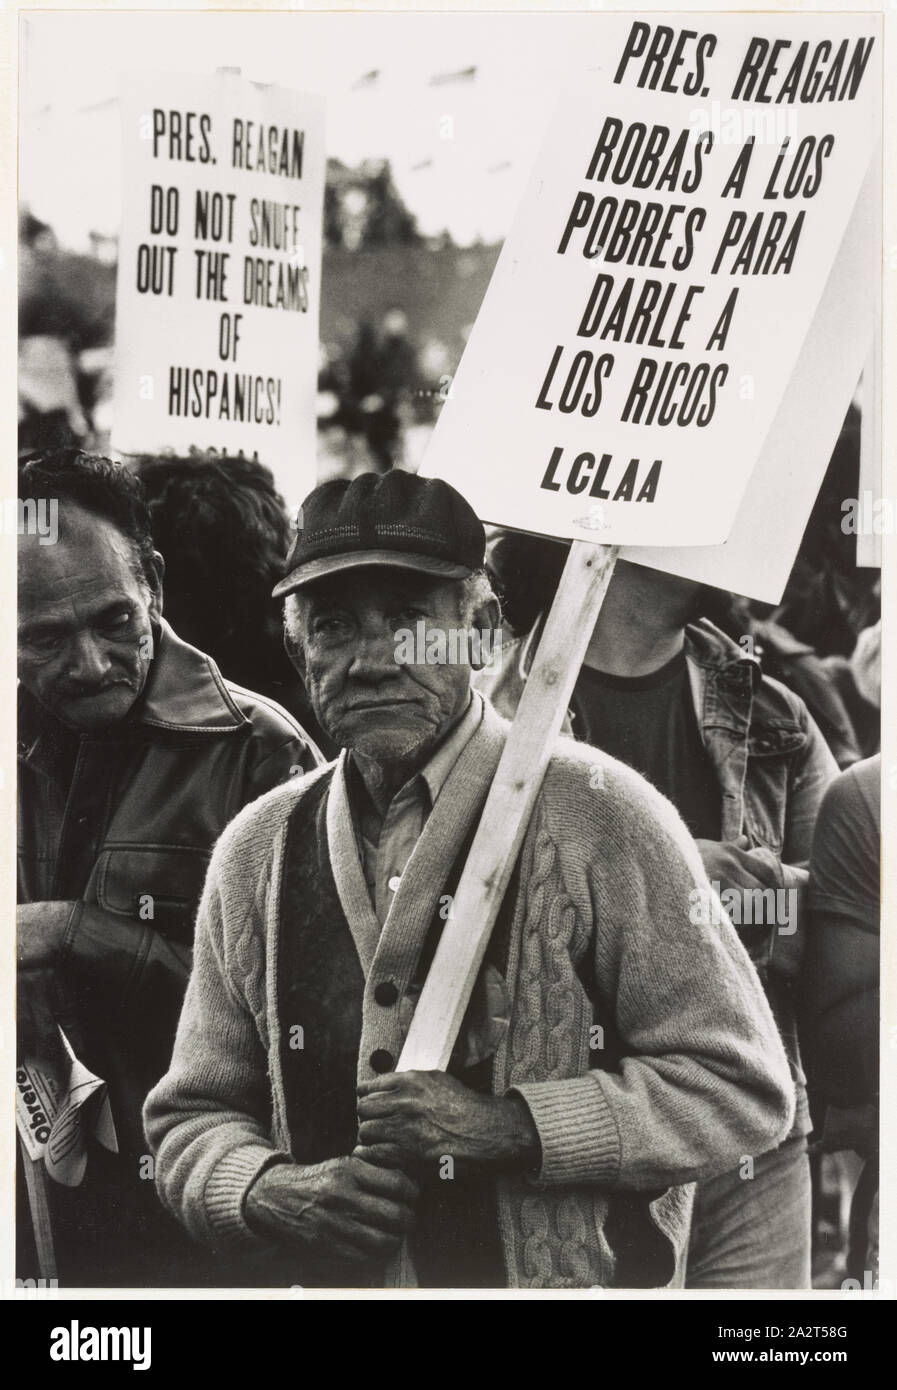 Reagan la roba a los pobres Migrant farm worker at a demonstration, Washington, D.C. / / Espada.; Photograph shows an elderly man in the Solidarity Day march, holding a picket sign with the message: Pres. Reagan robas a los pobres para darle a los ricos, LCLAA, in a crowd at a protest. A sign in the background has the message: Pres. Reagan, do not snuff out the dreams of Hispanics!; Stock Photo